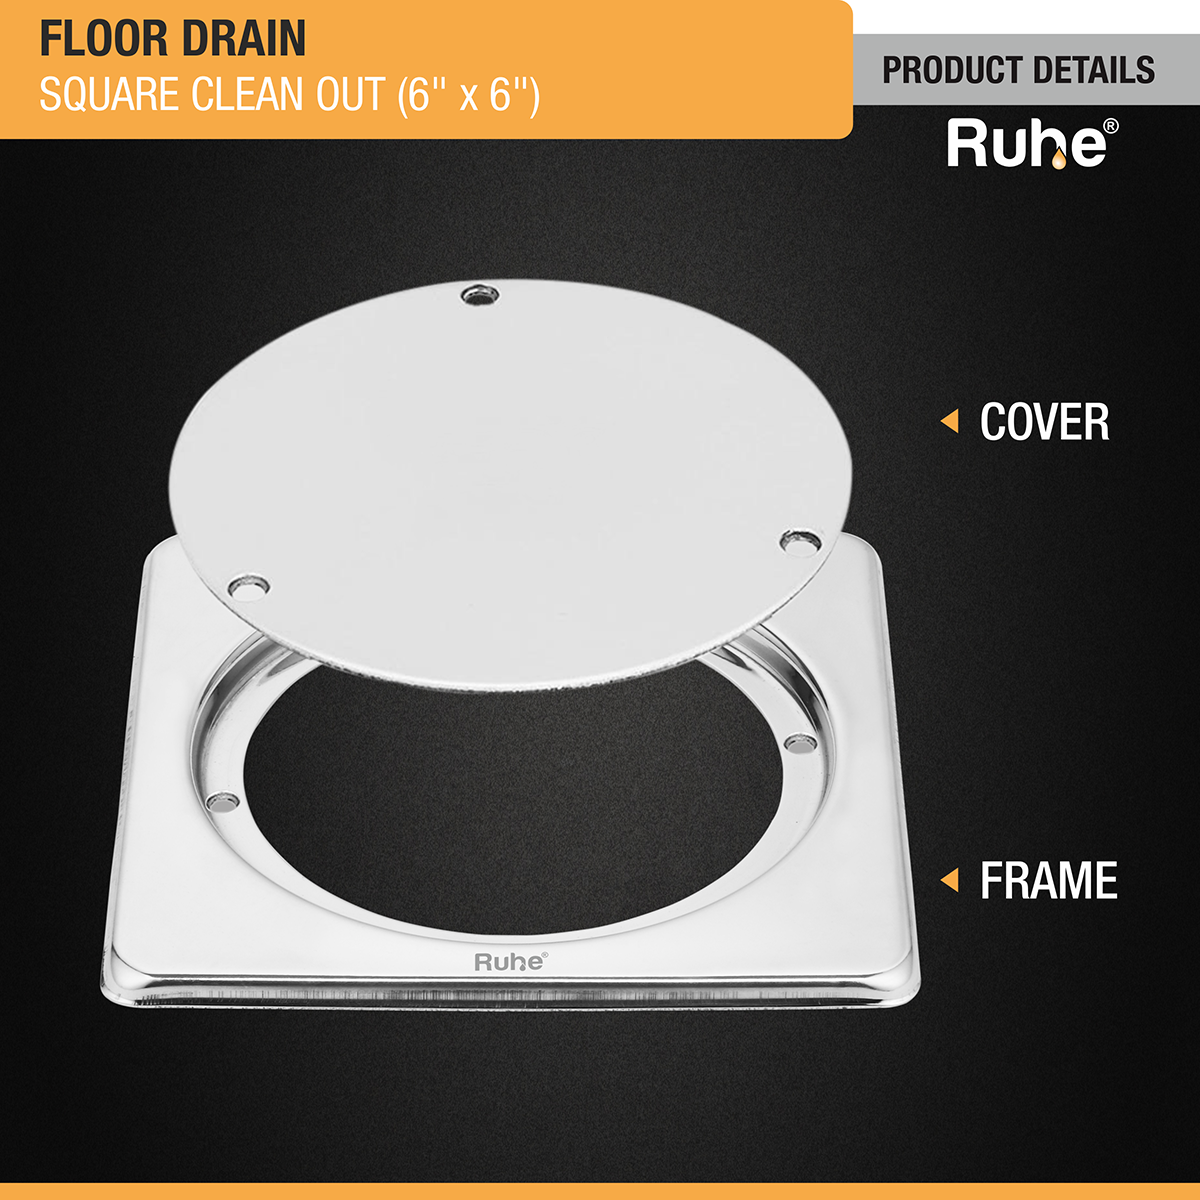 Square Clean Out with Collar Floor Drain (6 x 6 inches) product details